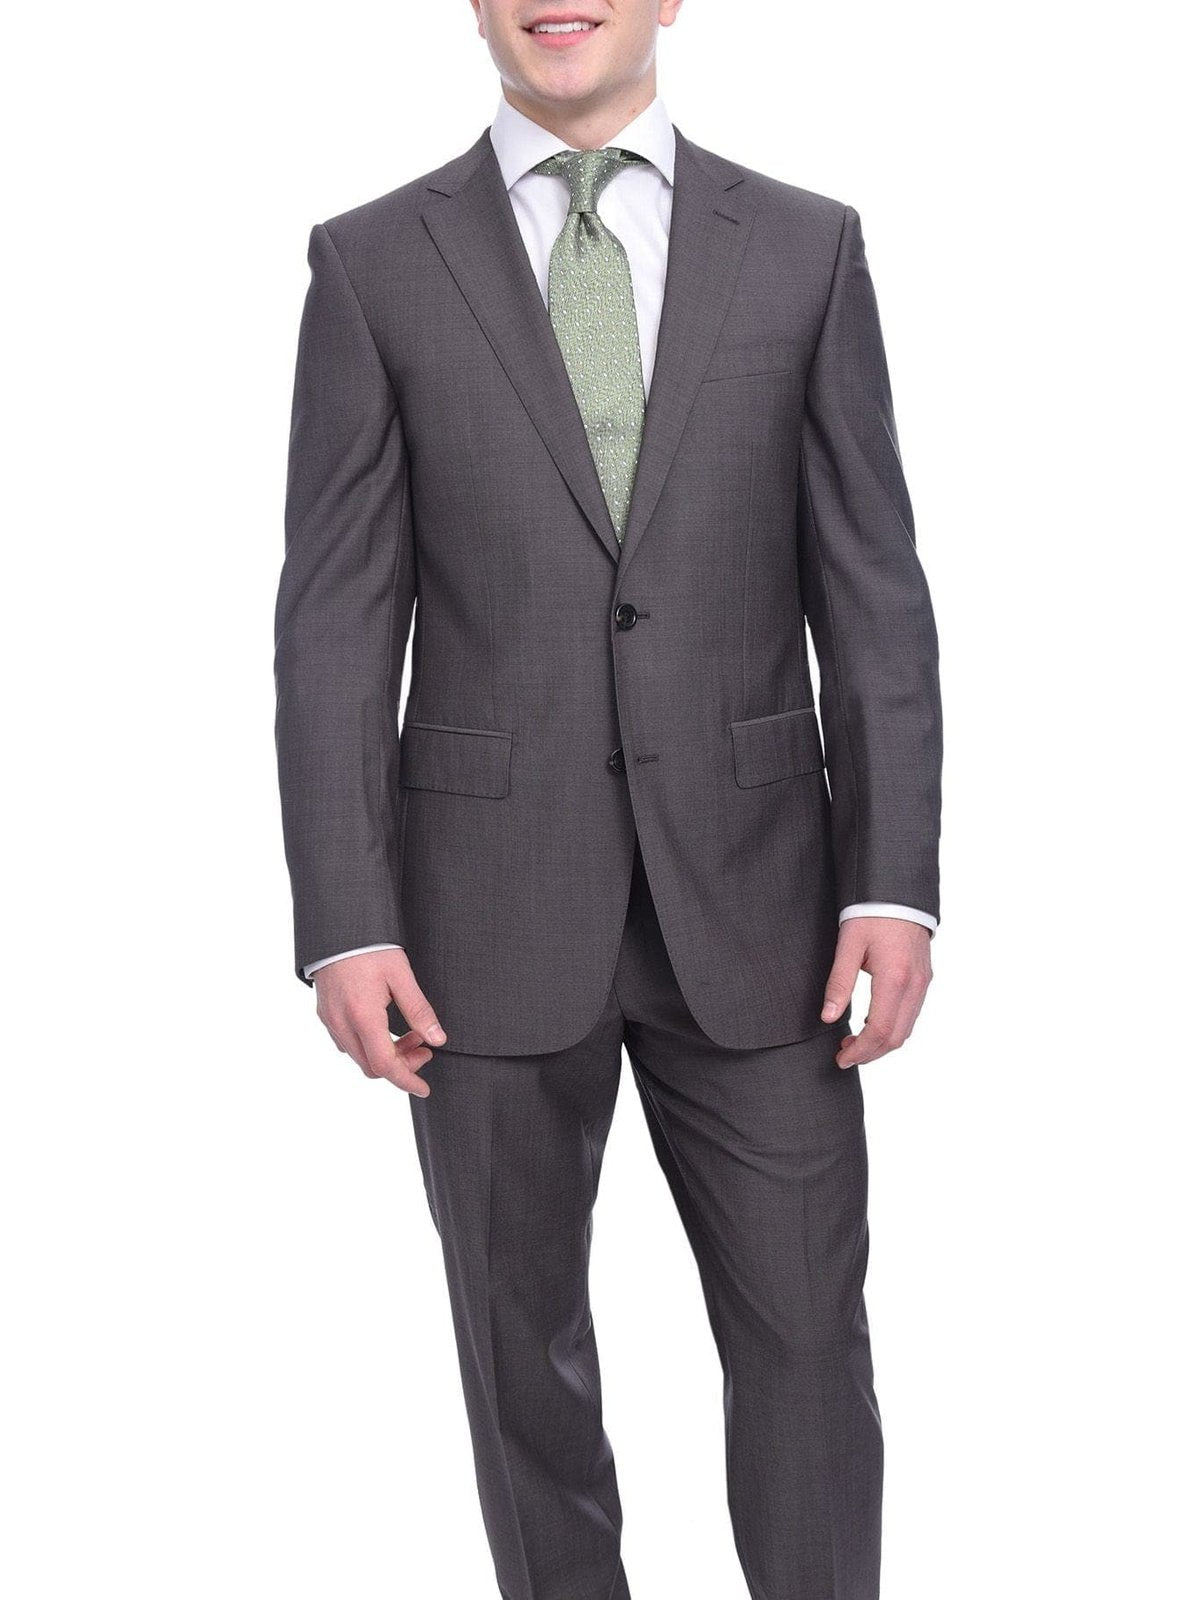 Napoli TWO PIECE SUITS Napoli Slim Fit Solid Taupe Half Canvassed Super 150s Marzotto Wool Suit